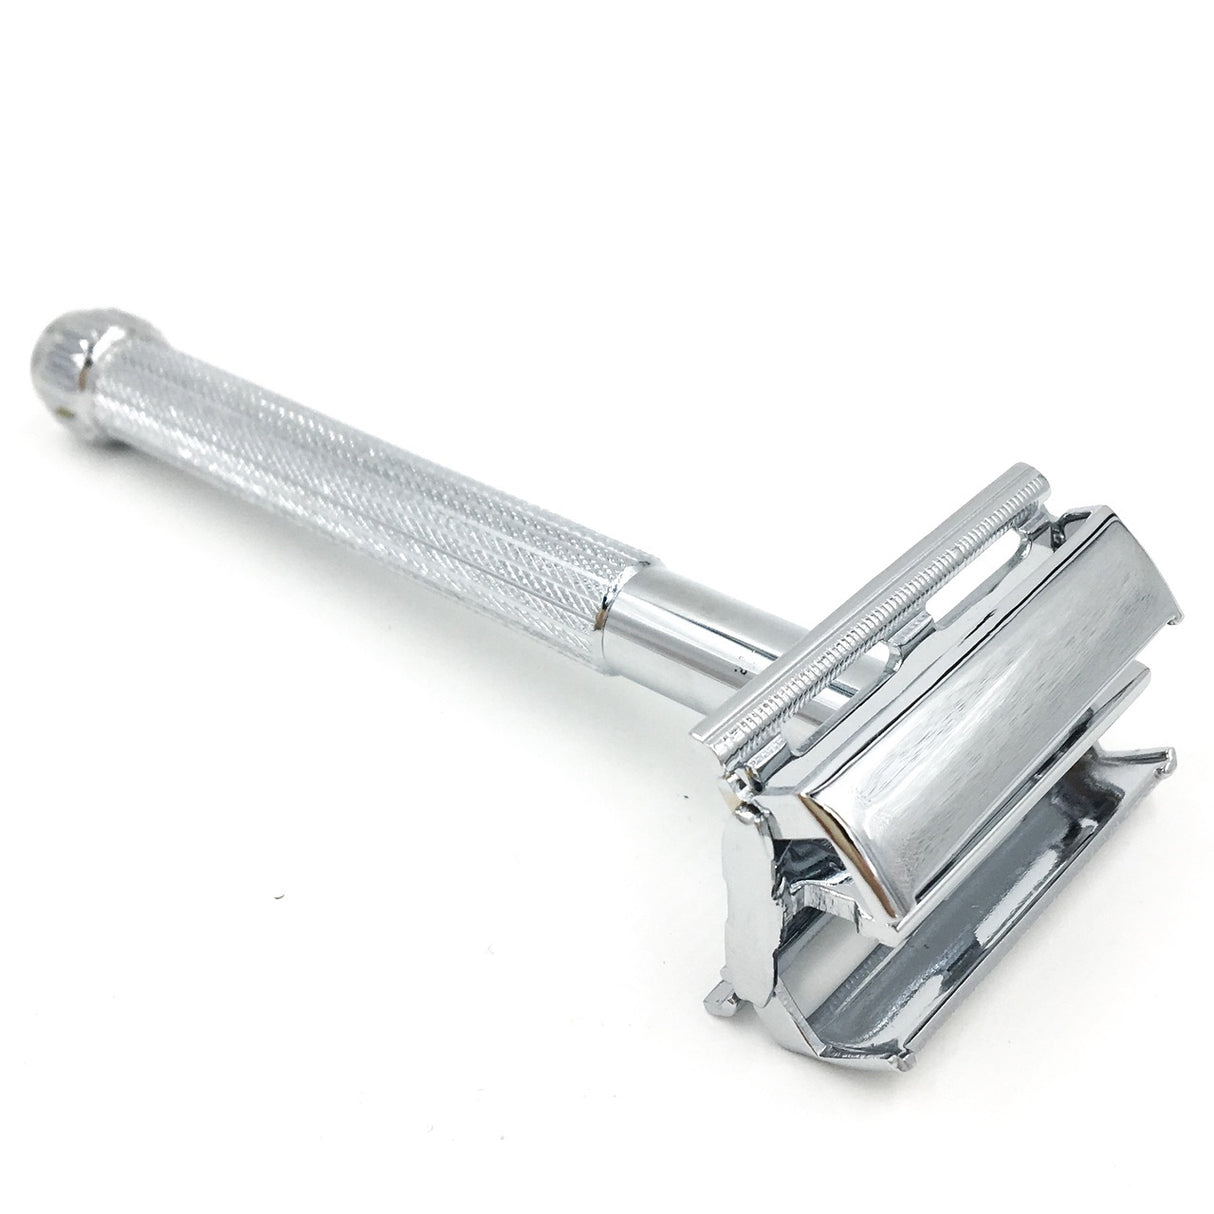 A Mountaineer Brand Products Parker Safety Razor 29L on a white background.